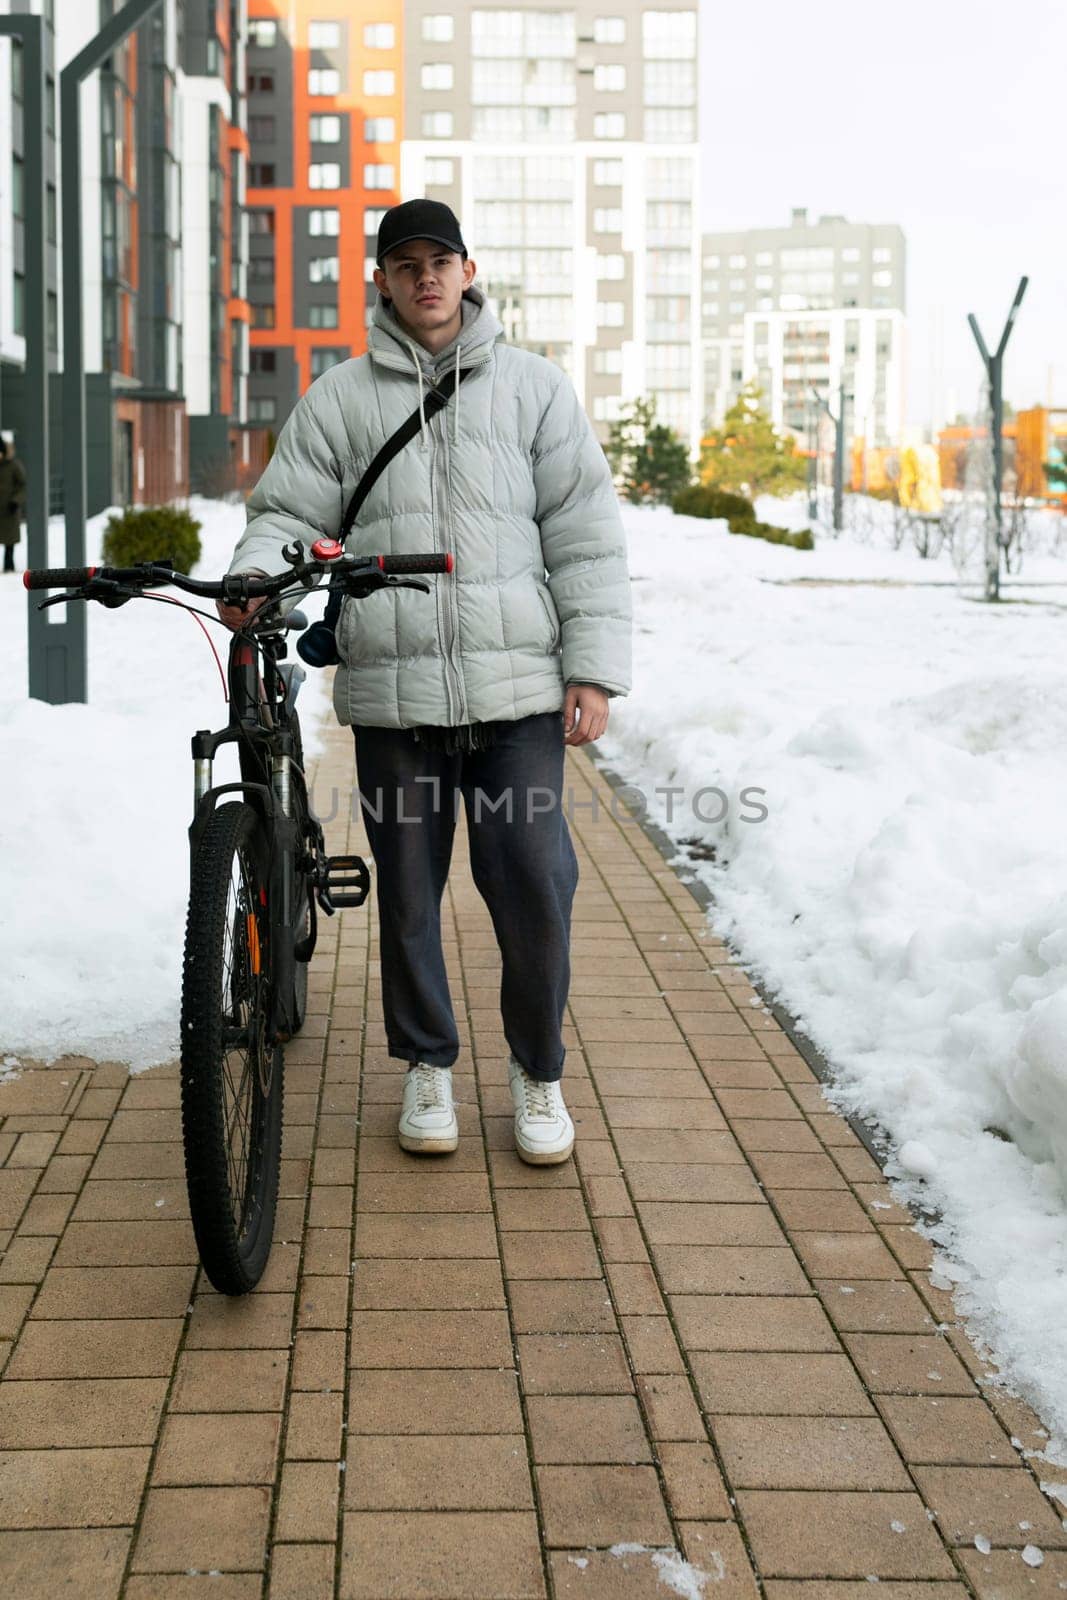 A young Caucasian man with a gray jacket and black cap is waiting for a friend with a bicycle under the porch.